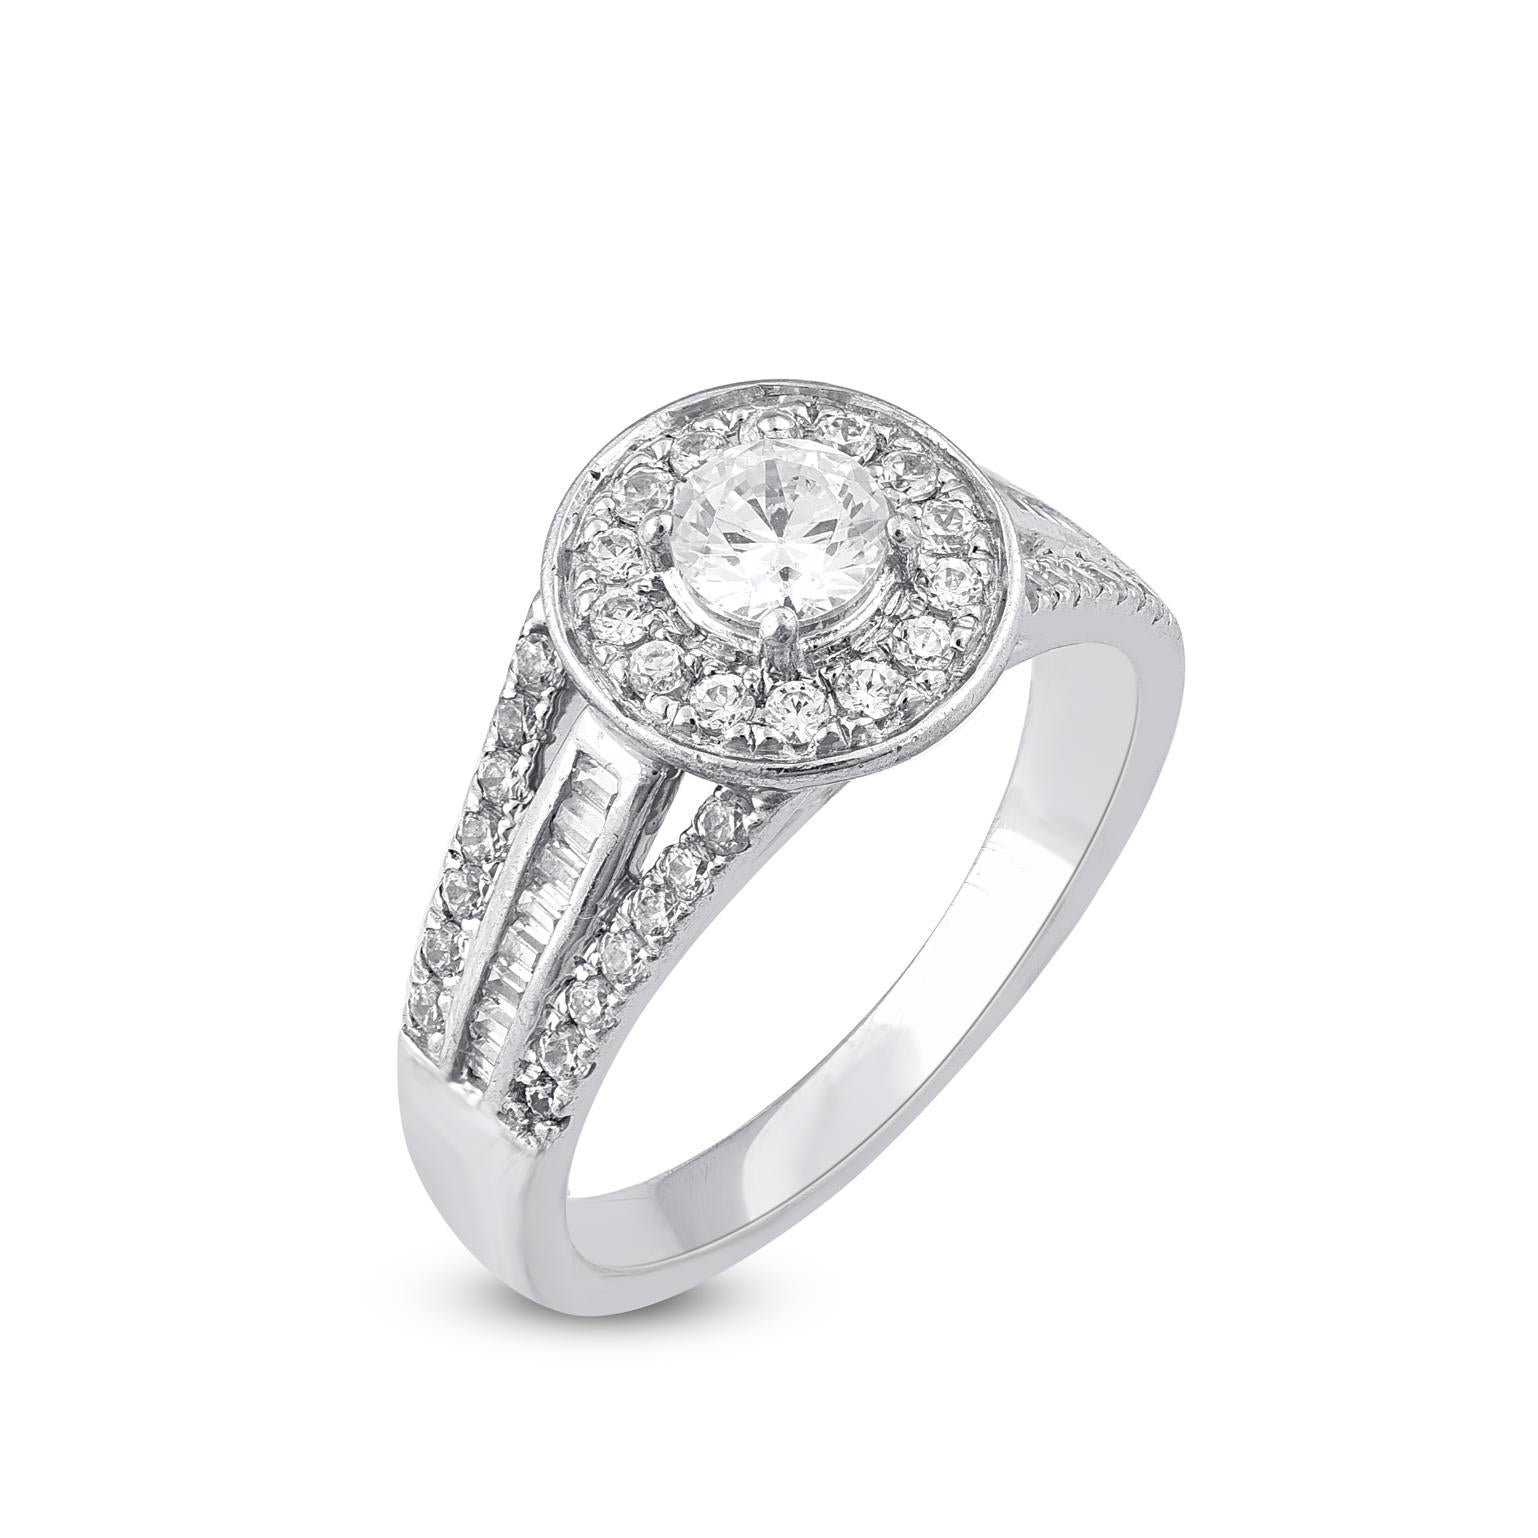 Exquisite 18 Karat white gold engagement featuring 42 round and 18 Baguette diamonds. This ring is superbly detailed to perfection and set with 1.00 carat of sparkling round and baguette diamonds in secured pave, prong and channel setting. The